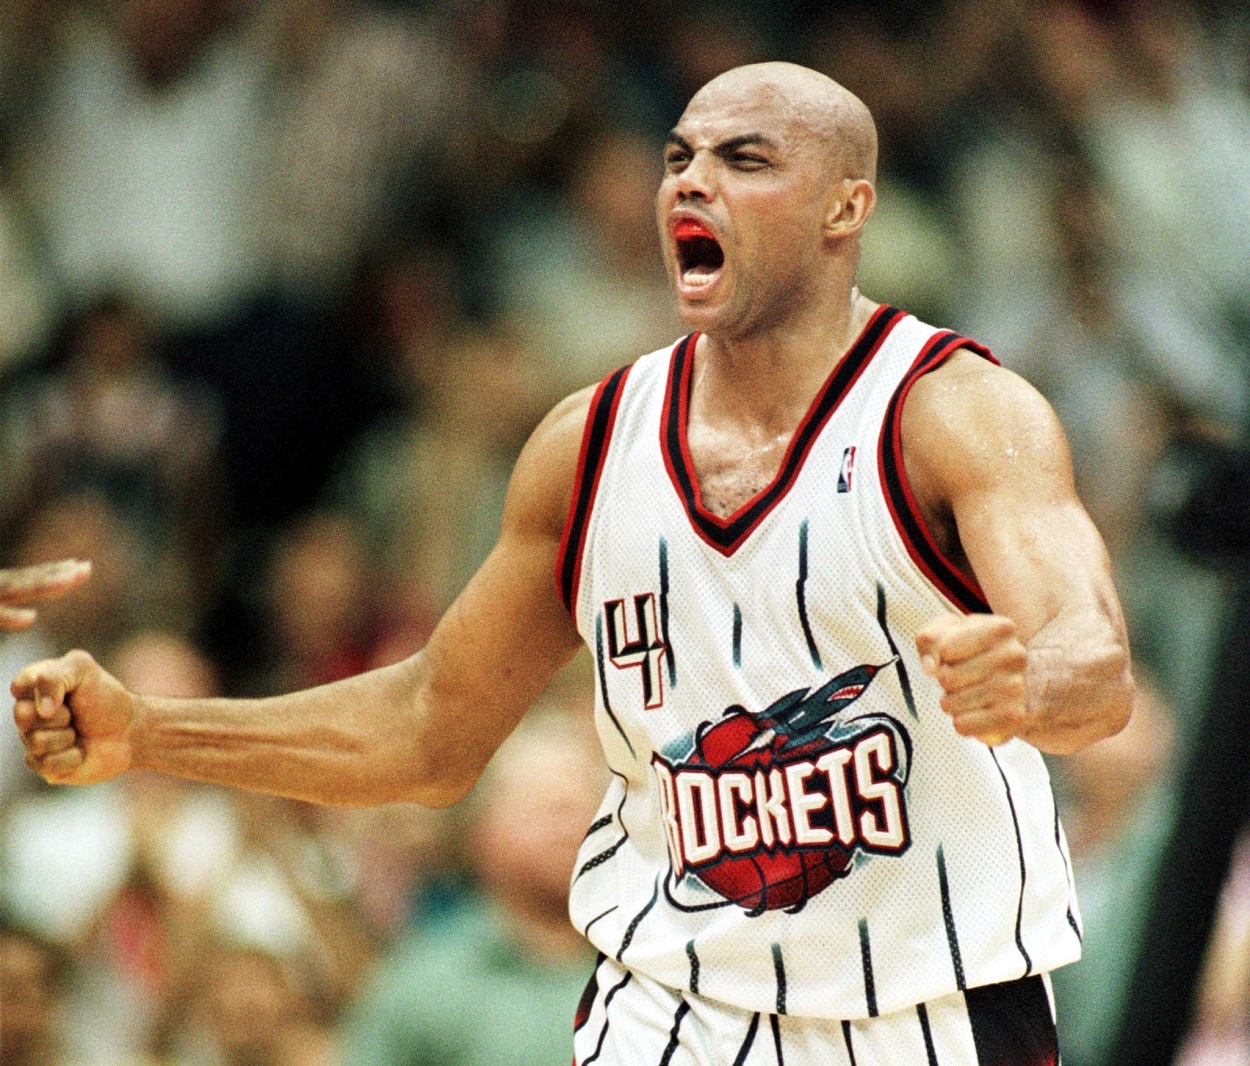 Charles Barkley reacts after the Houston Rockets defeat the LA Lakers in the 1999 NBA playoffs